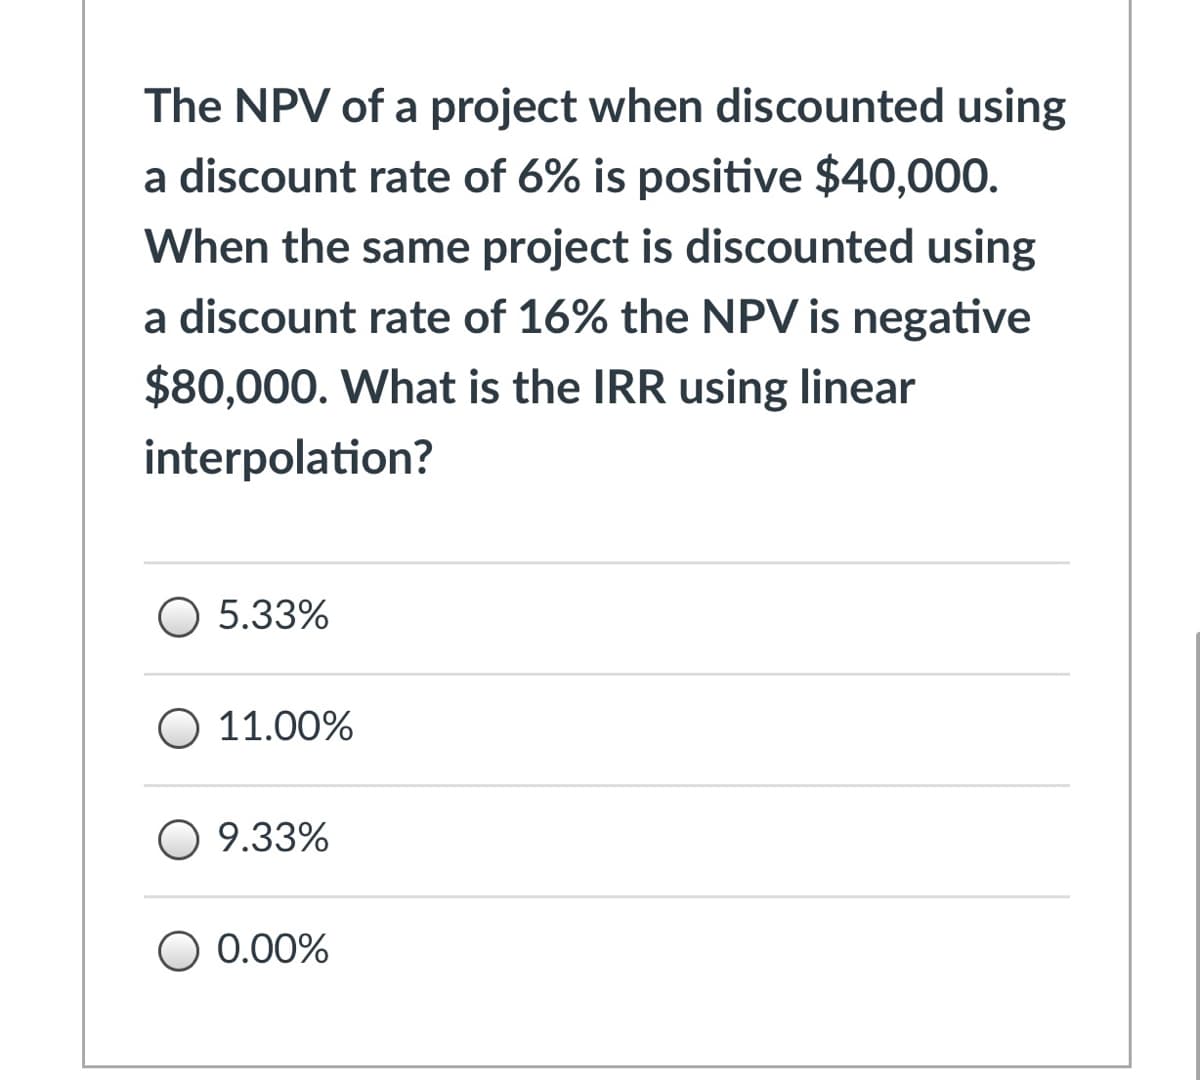 The NPV of a project when discounted using
a discount rate of 6% is positive $40,000.
When the same project is discounted using
a discount rate of 16% the NPV is negative
$80,000. What is the IRR using linear
interpolation?
O 5.33%
O 11.00%
O 9.33%
O 0.00%
